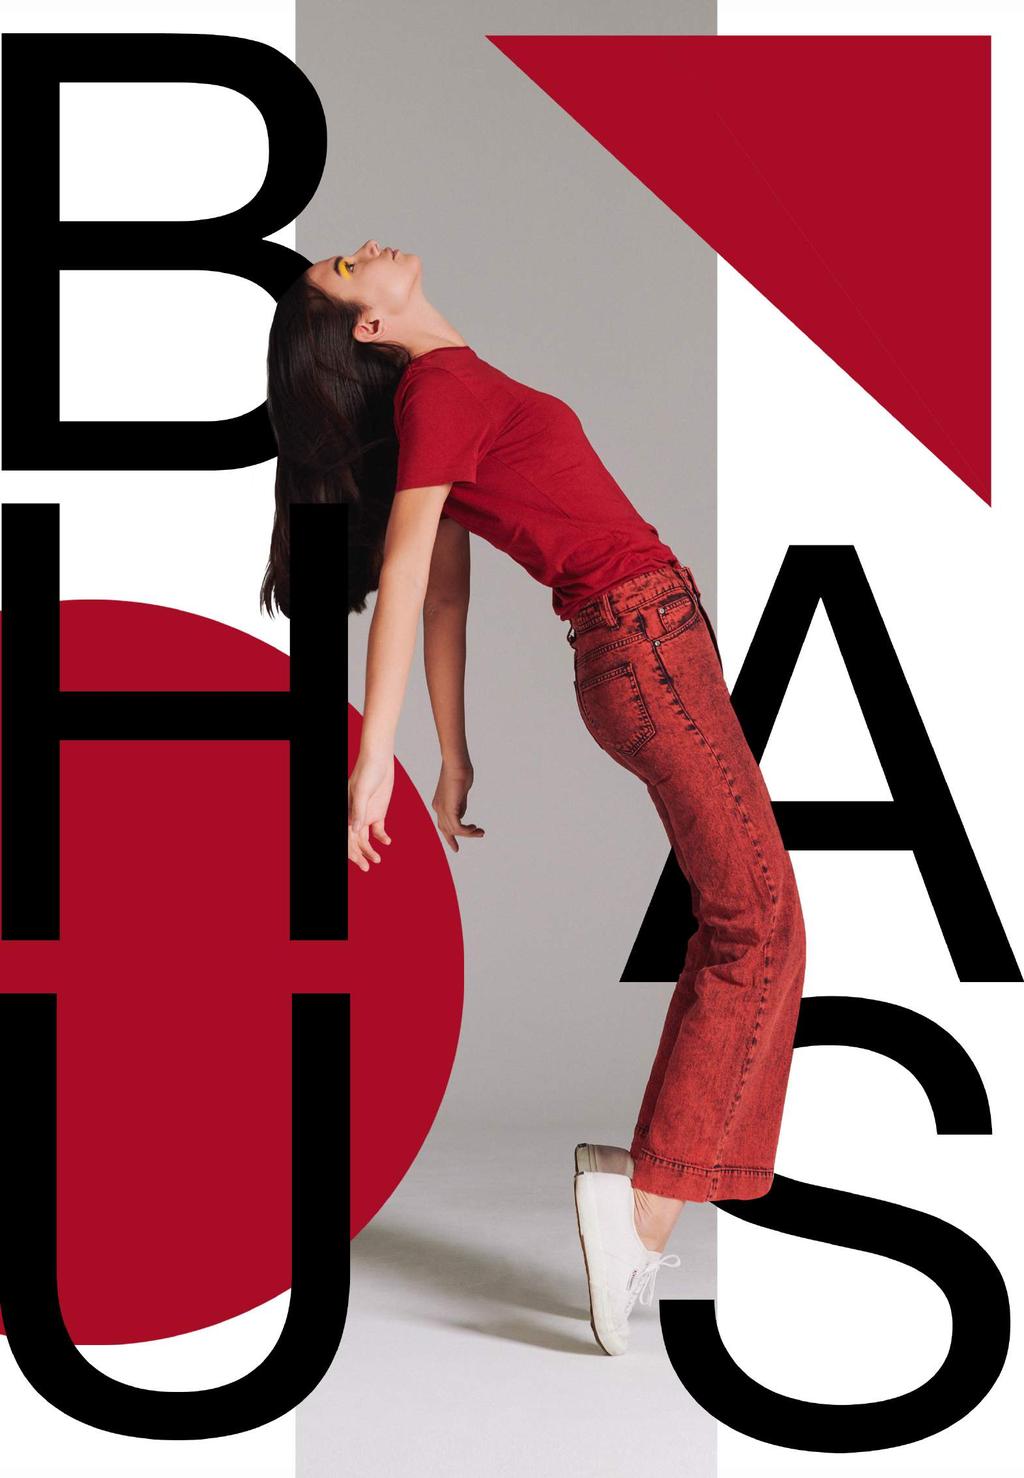 B-Haus 2 3 Knowledge, skills, competence: these are the distinctive Spring/Summer 2020 Collection The new Berto Spring Summer collection is inspired by BAUHAUS art movement, by its aesthetic and